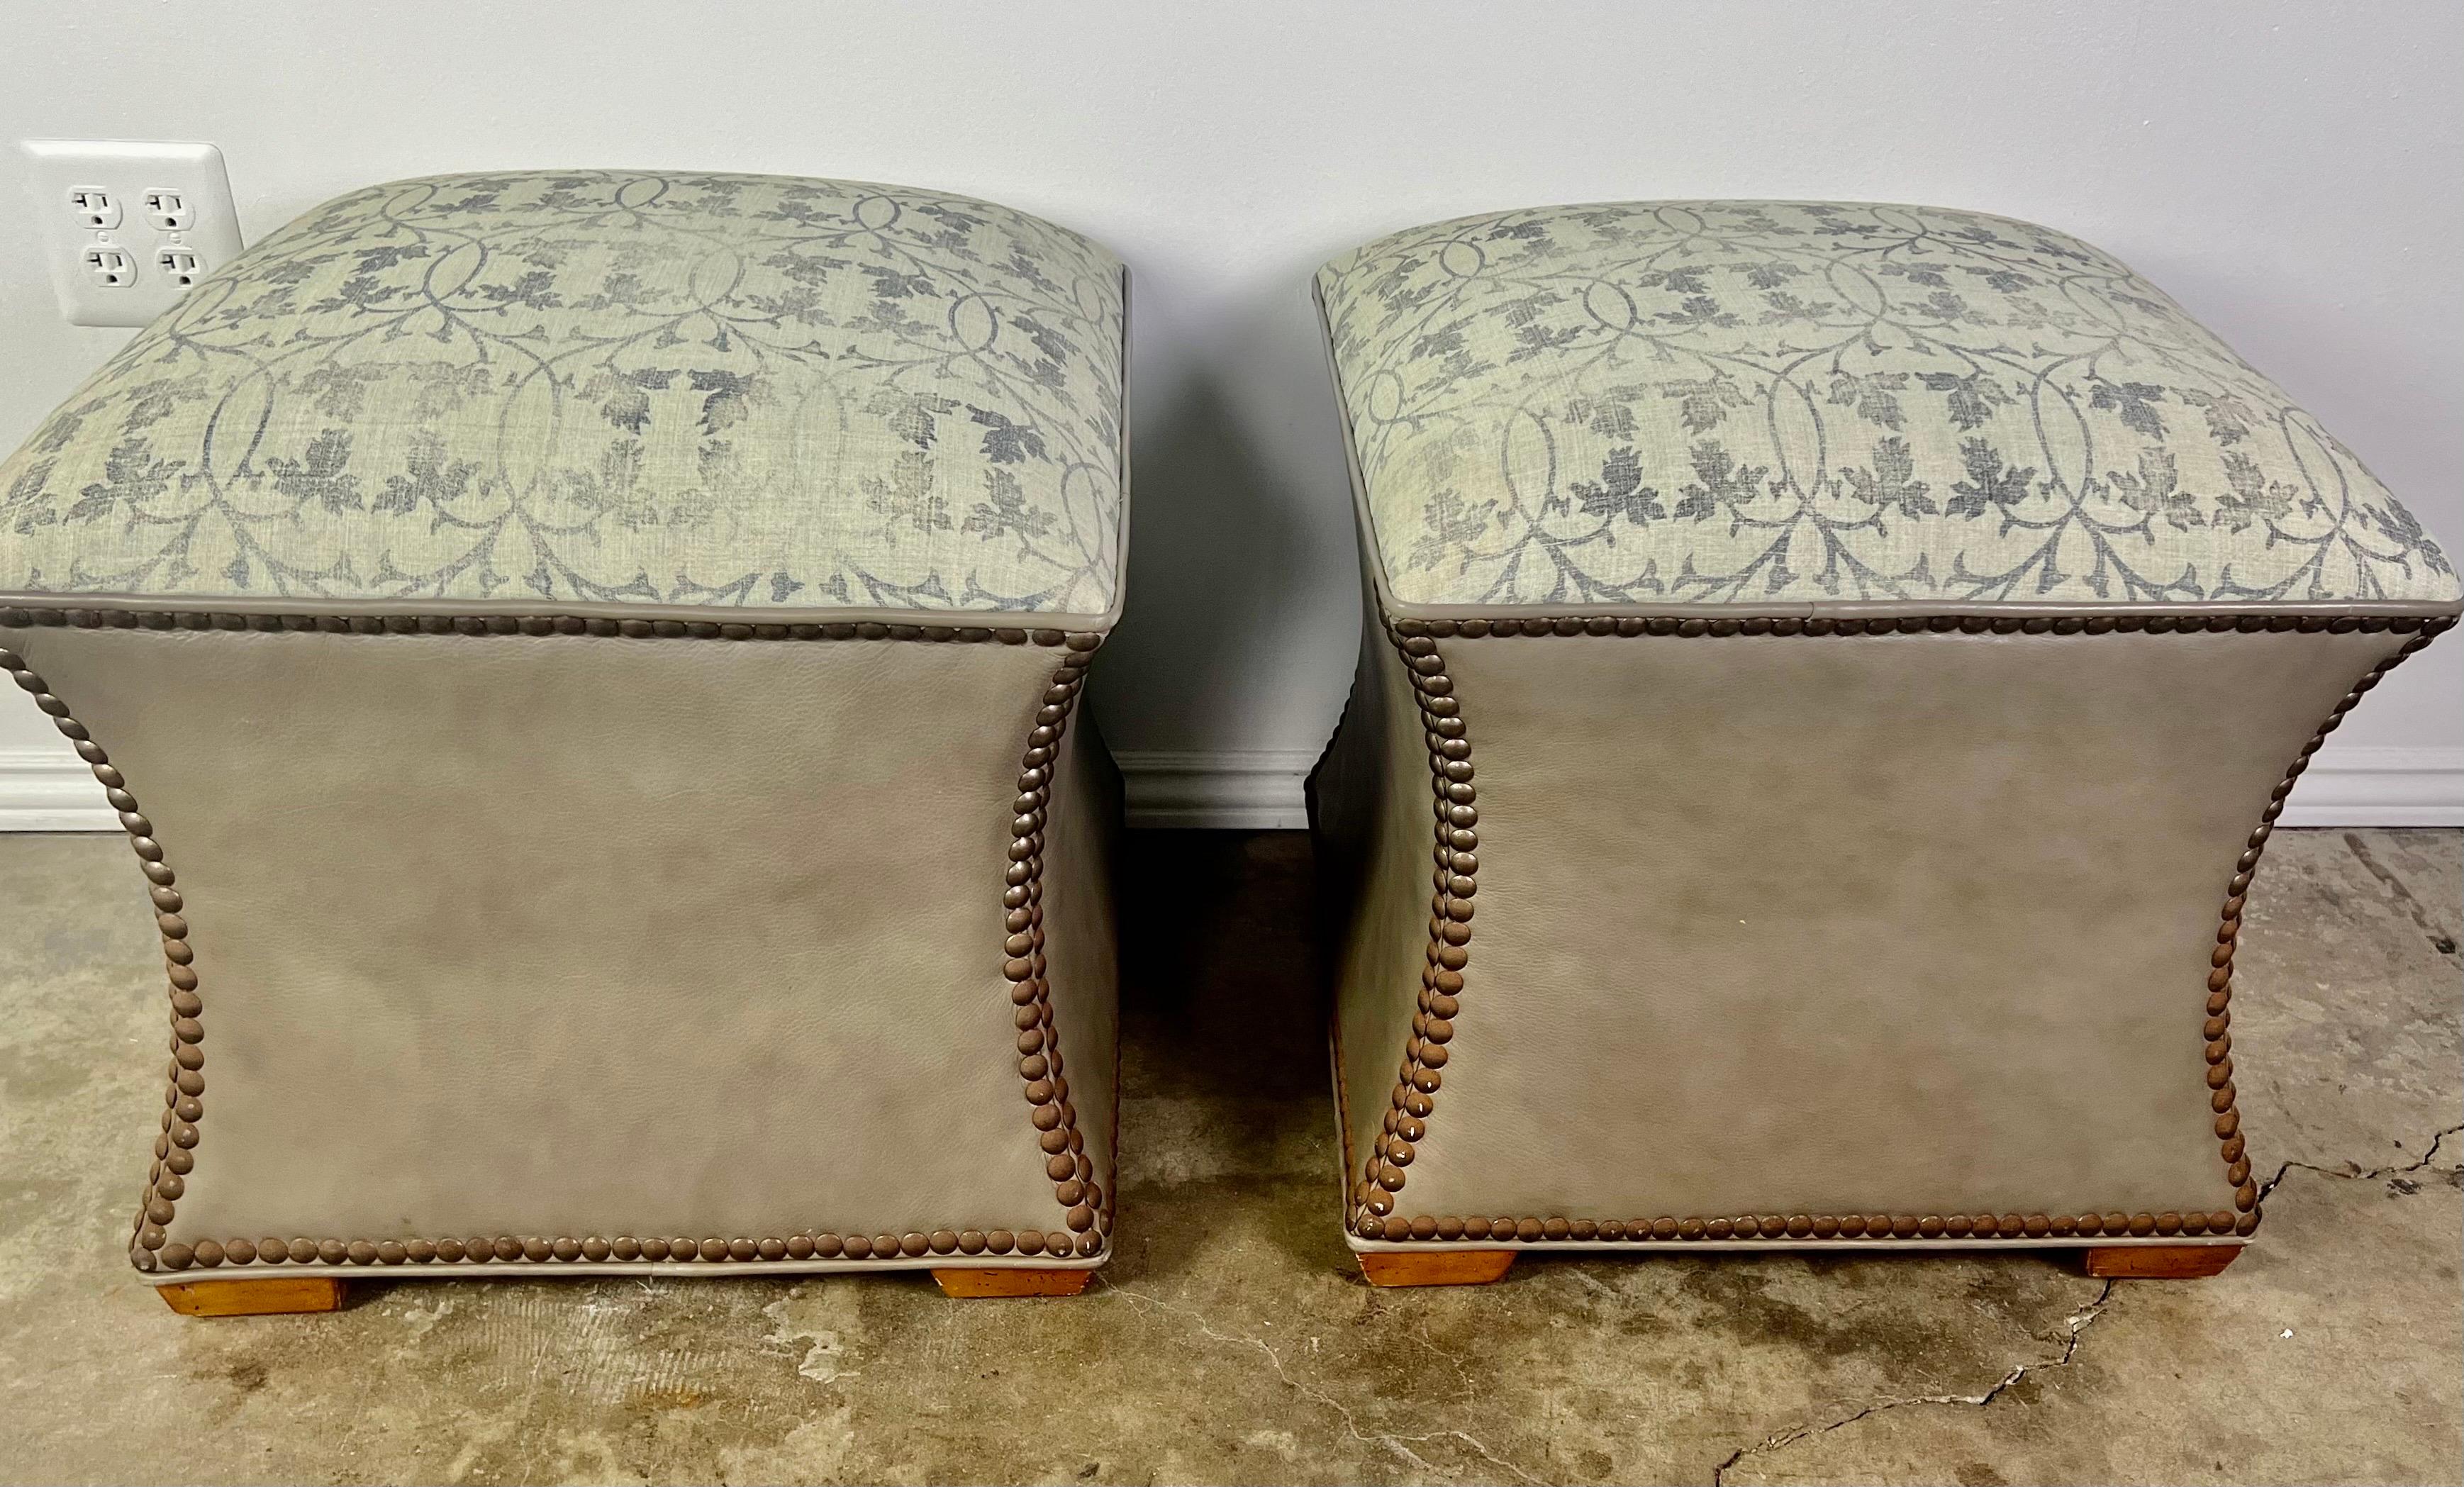 Pair of custom ottomans made with authentic Rose Tarlow fabric tops and neutral latte colored leather bases with nailhead trim detail.